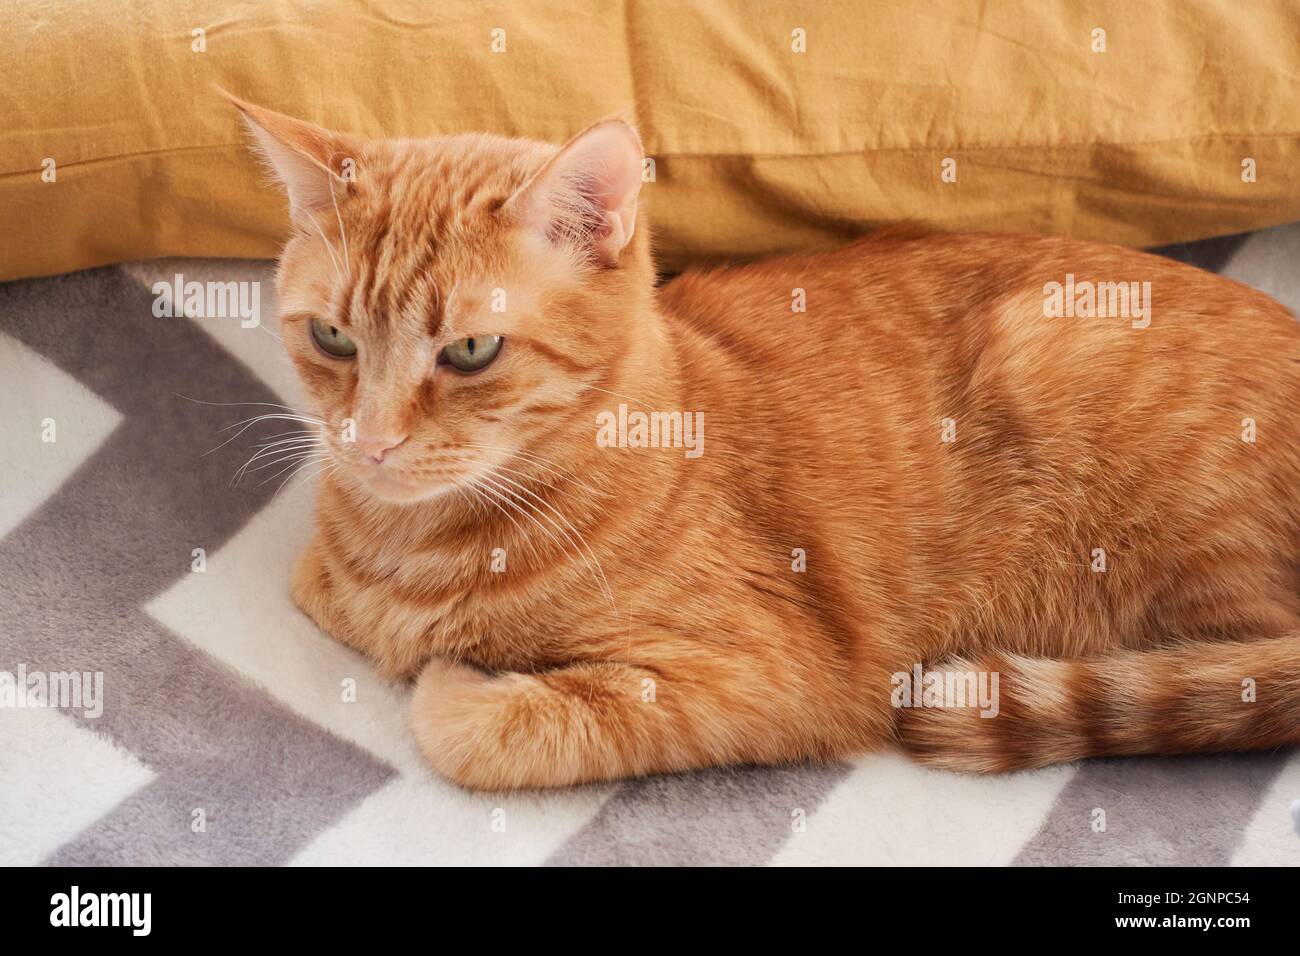 Orange and ginger cat close-up portrait. Adult red cat lying on a gray fluffy blanket background. Domestic feline concept. High quality photo Stock Photo